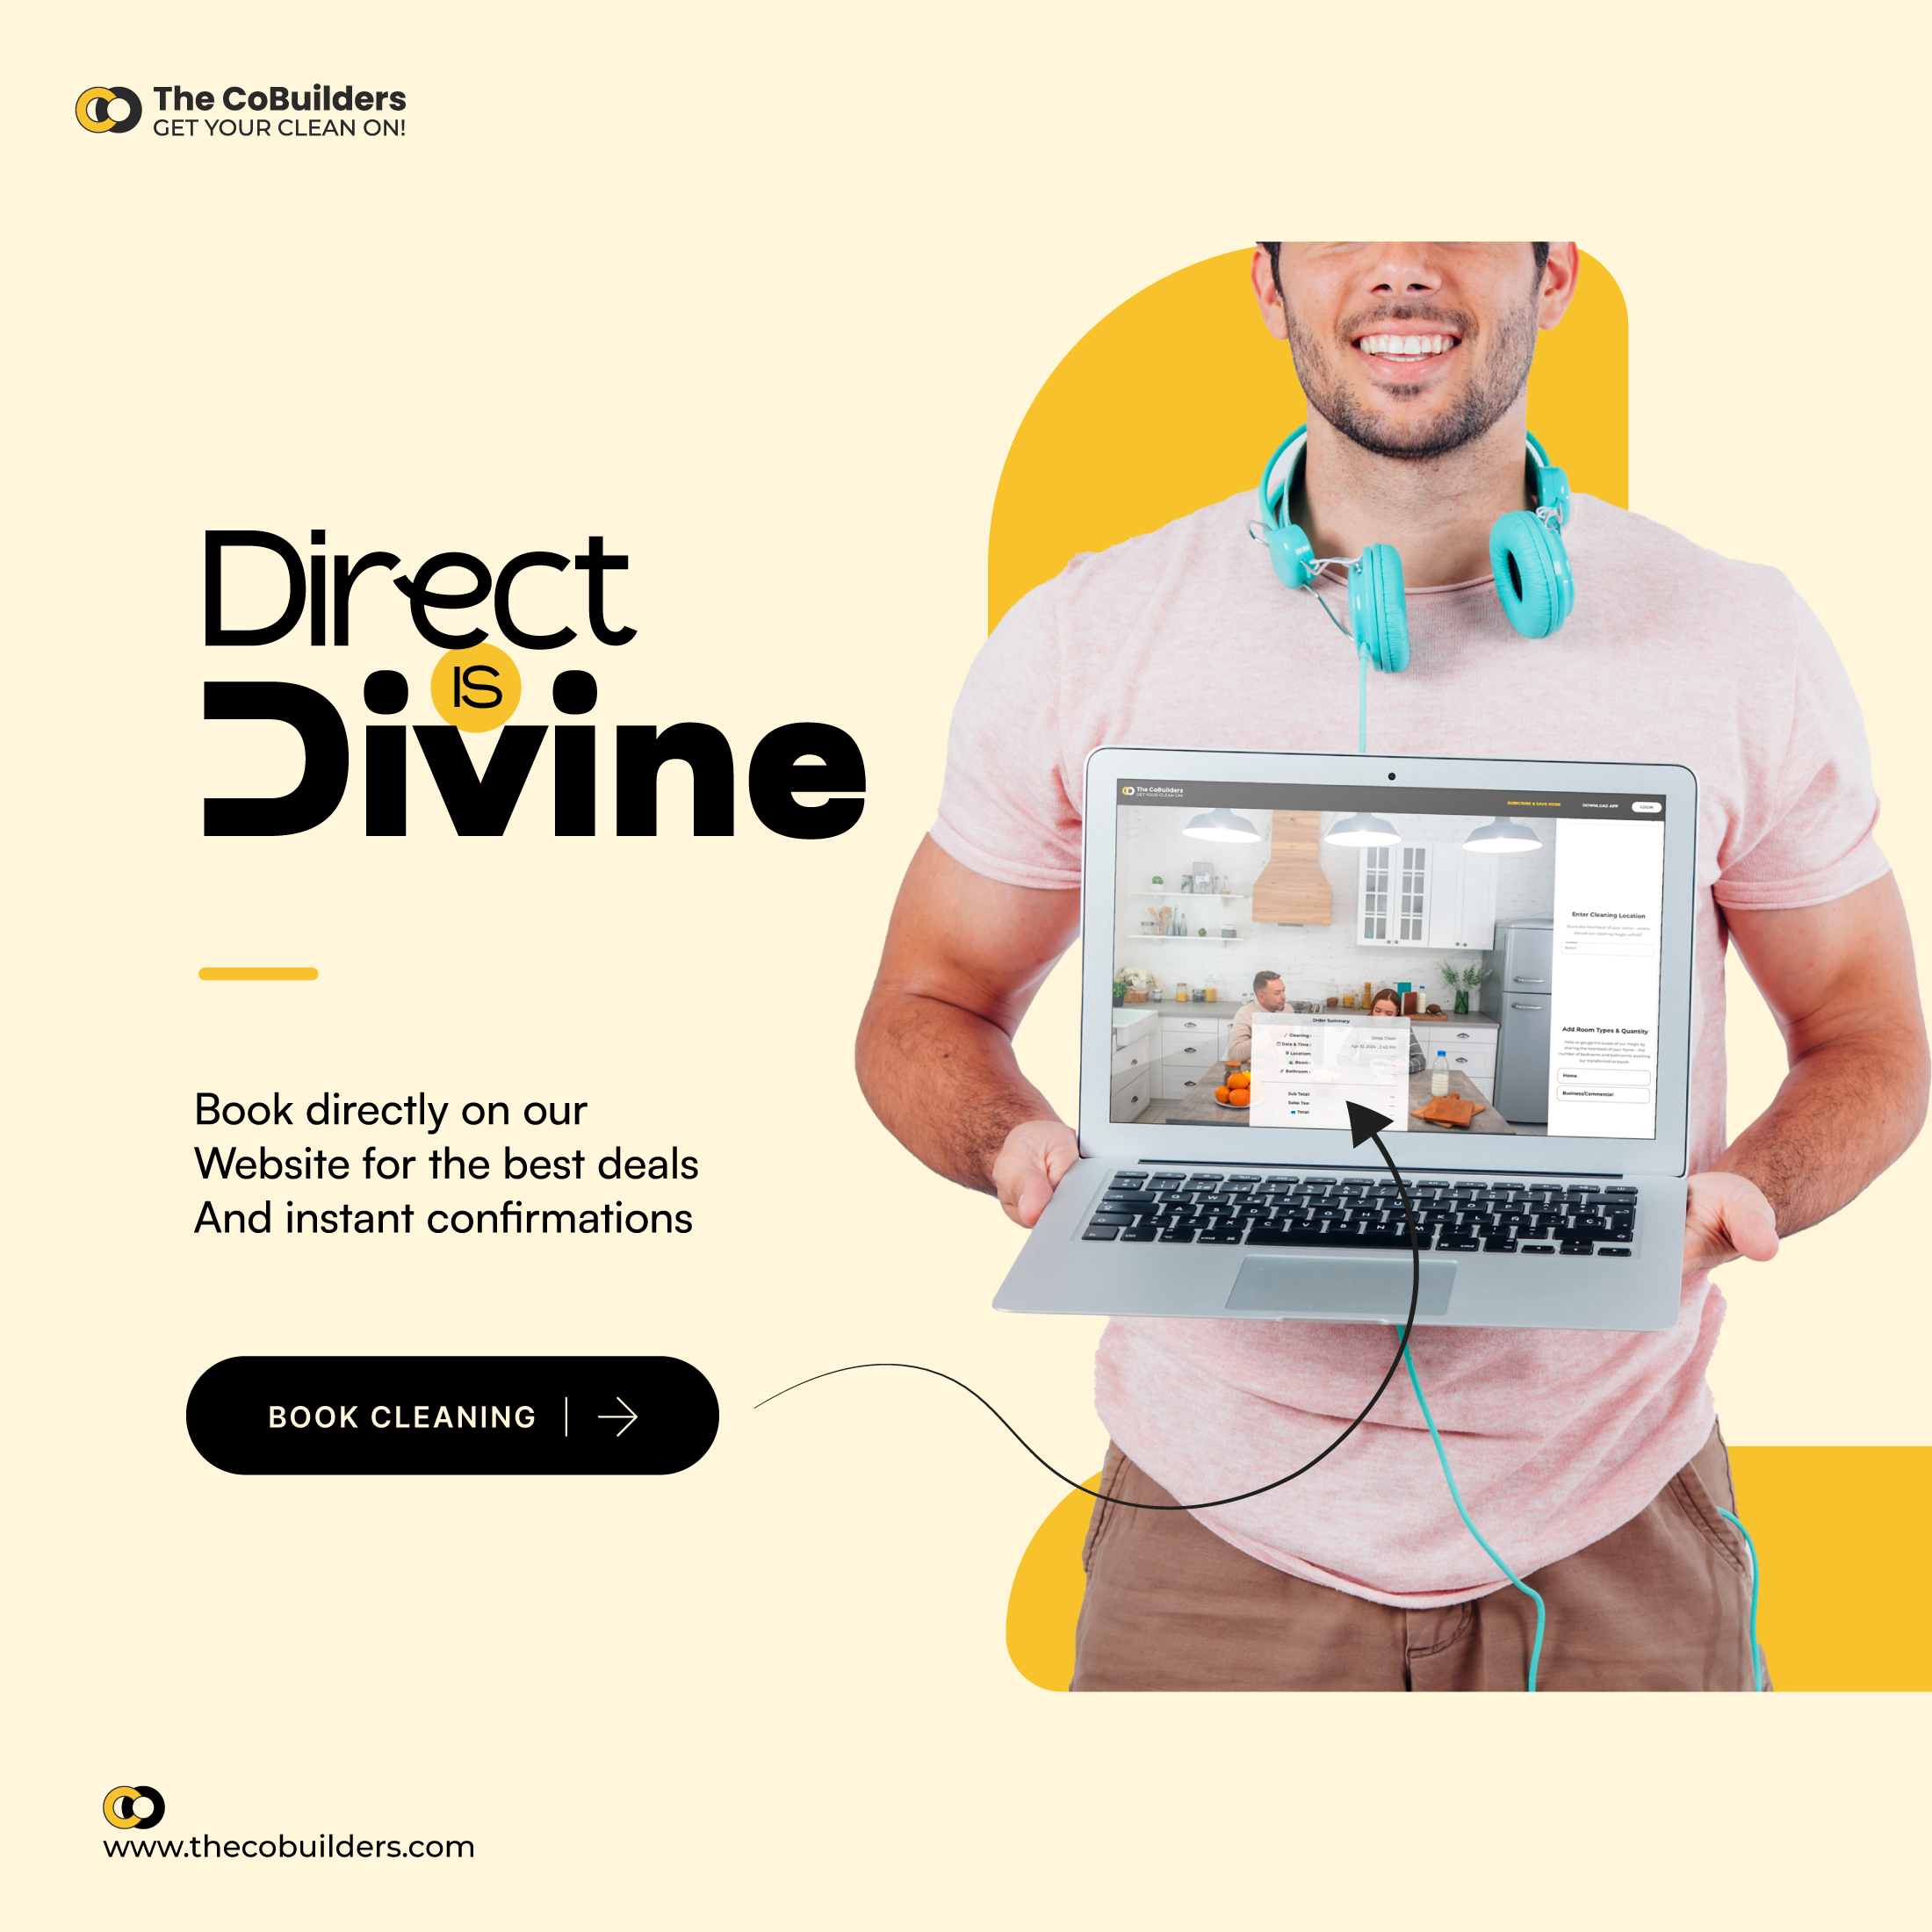 direct is divine Book directly on our website.